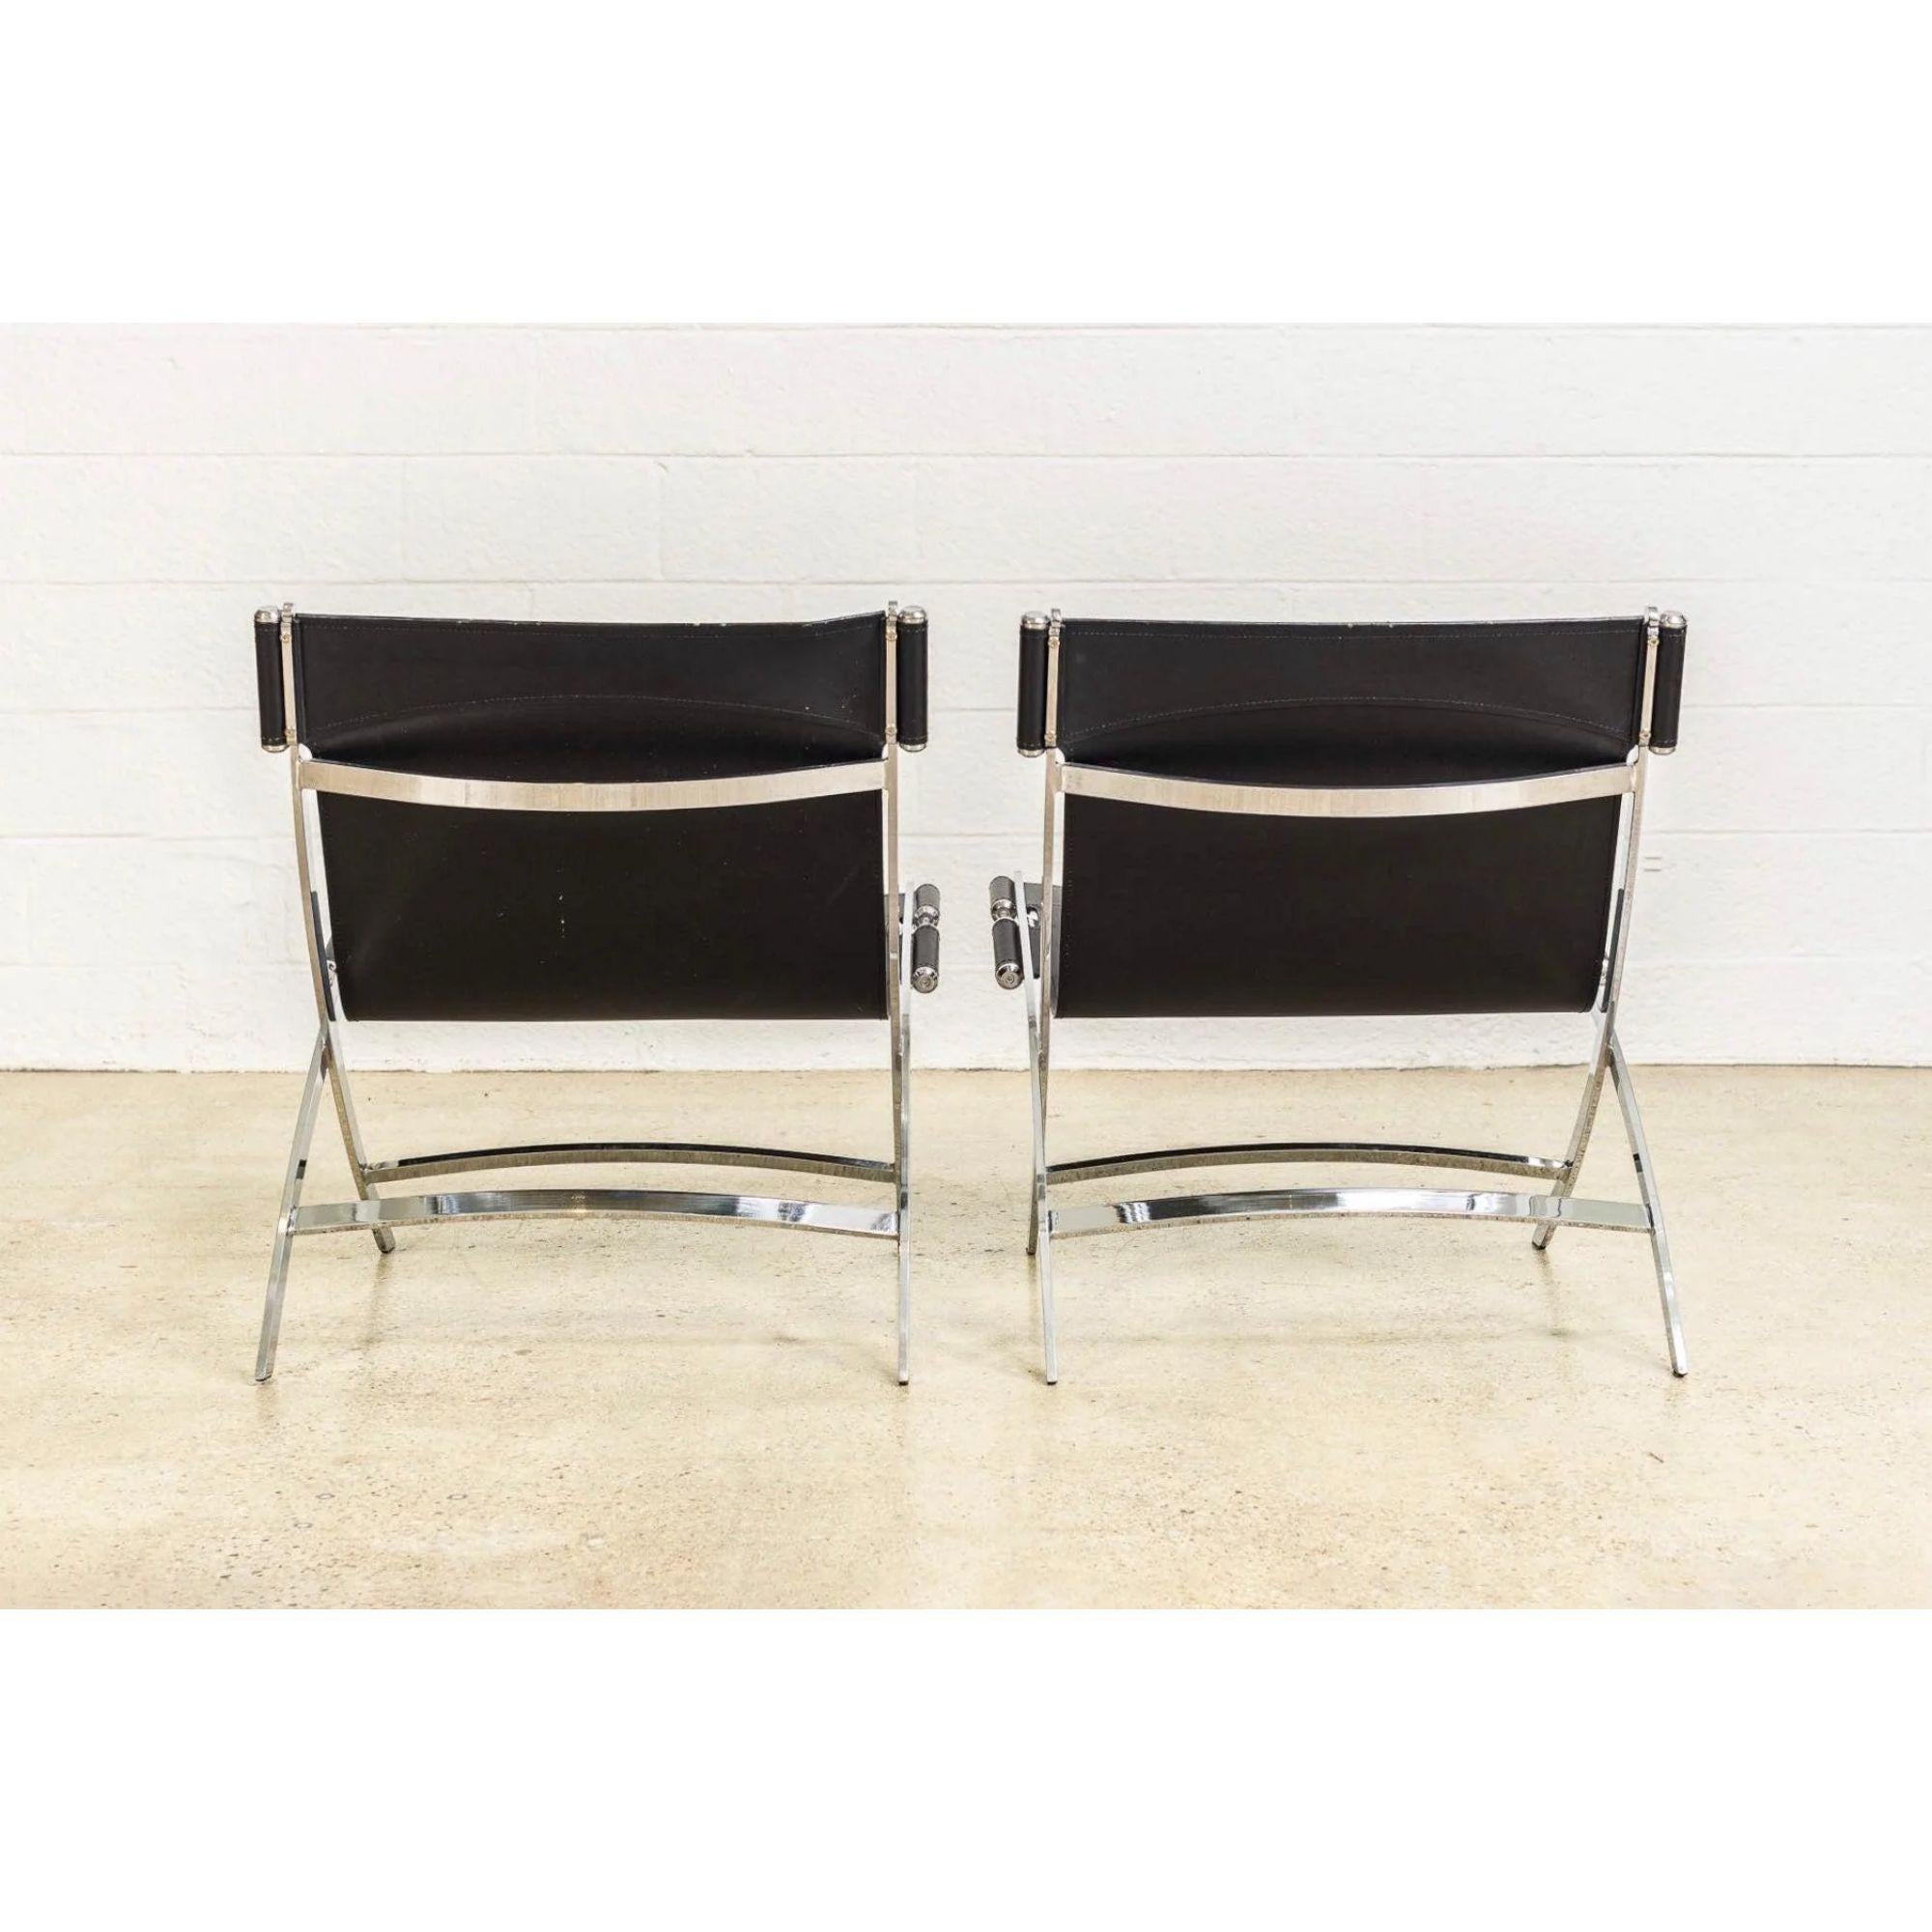 Postmodern Chrome & Black Leather Timeless Lounge Chairs by Antonio Citterio In Good Condition For Sale In Detroit, MI